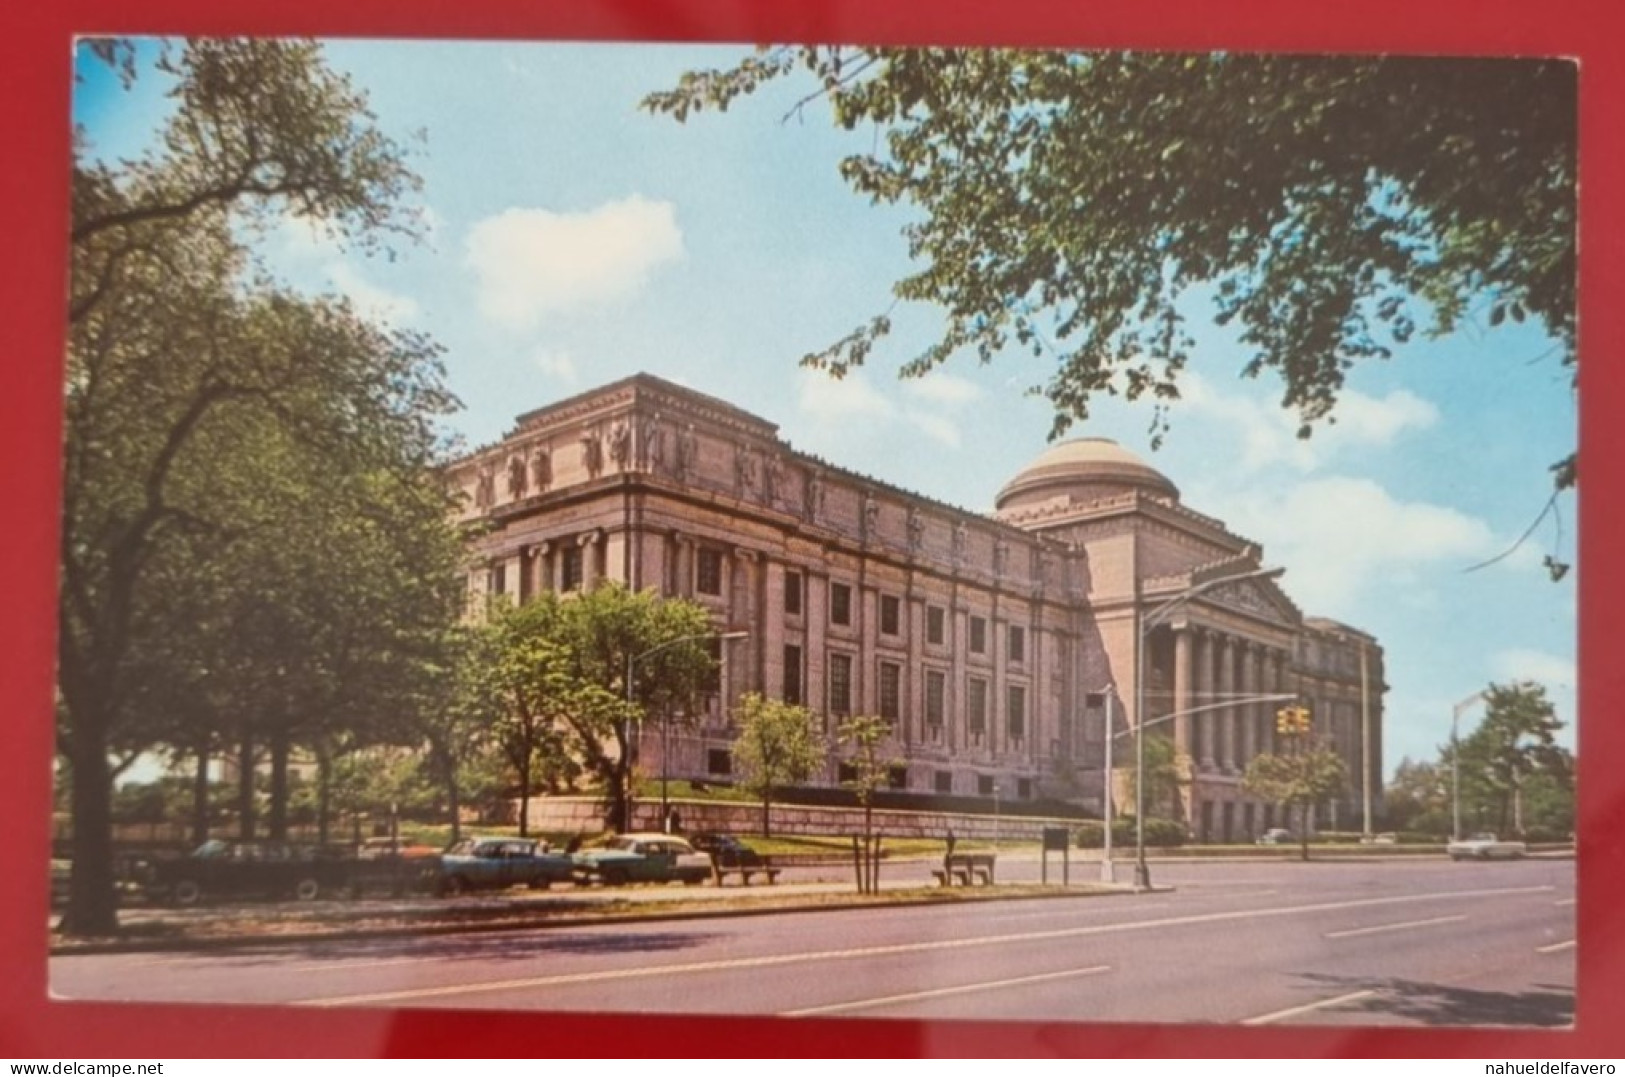 Uncirculated Postcard - USA - NY, NEW YORK CITY - BROOKLYN MUSEUM - Museums